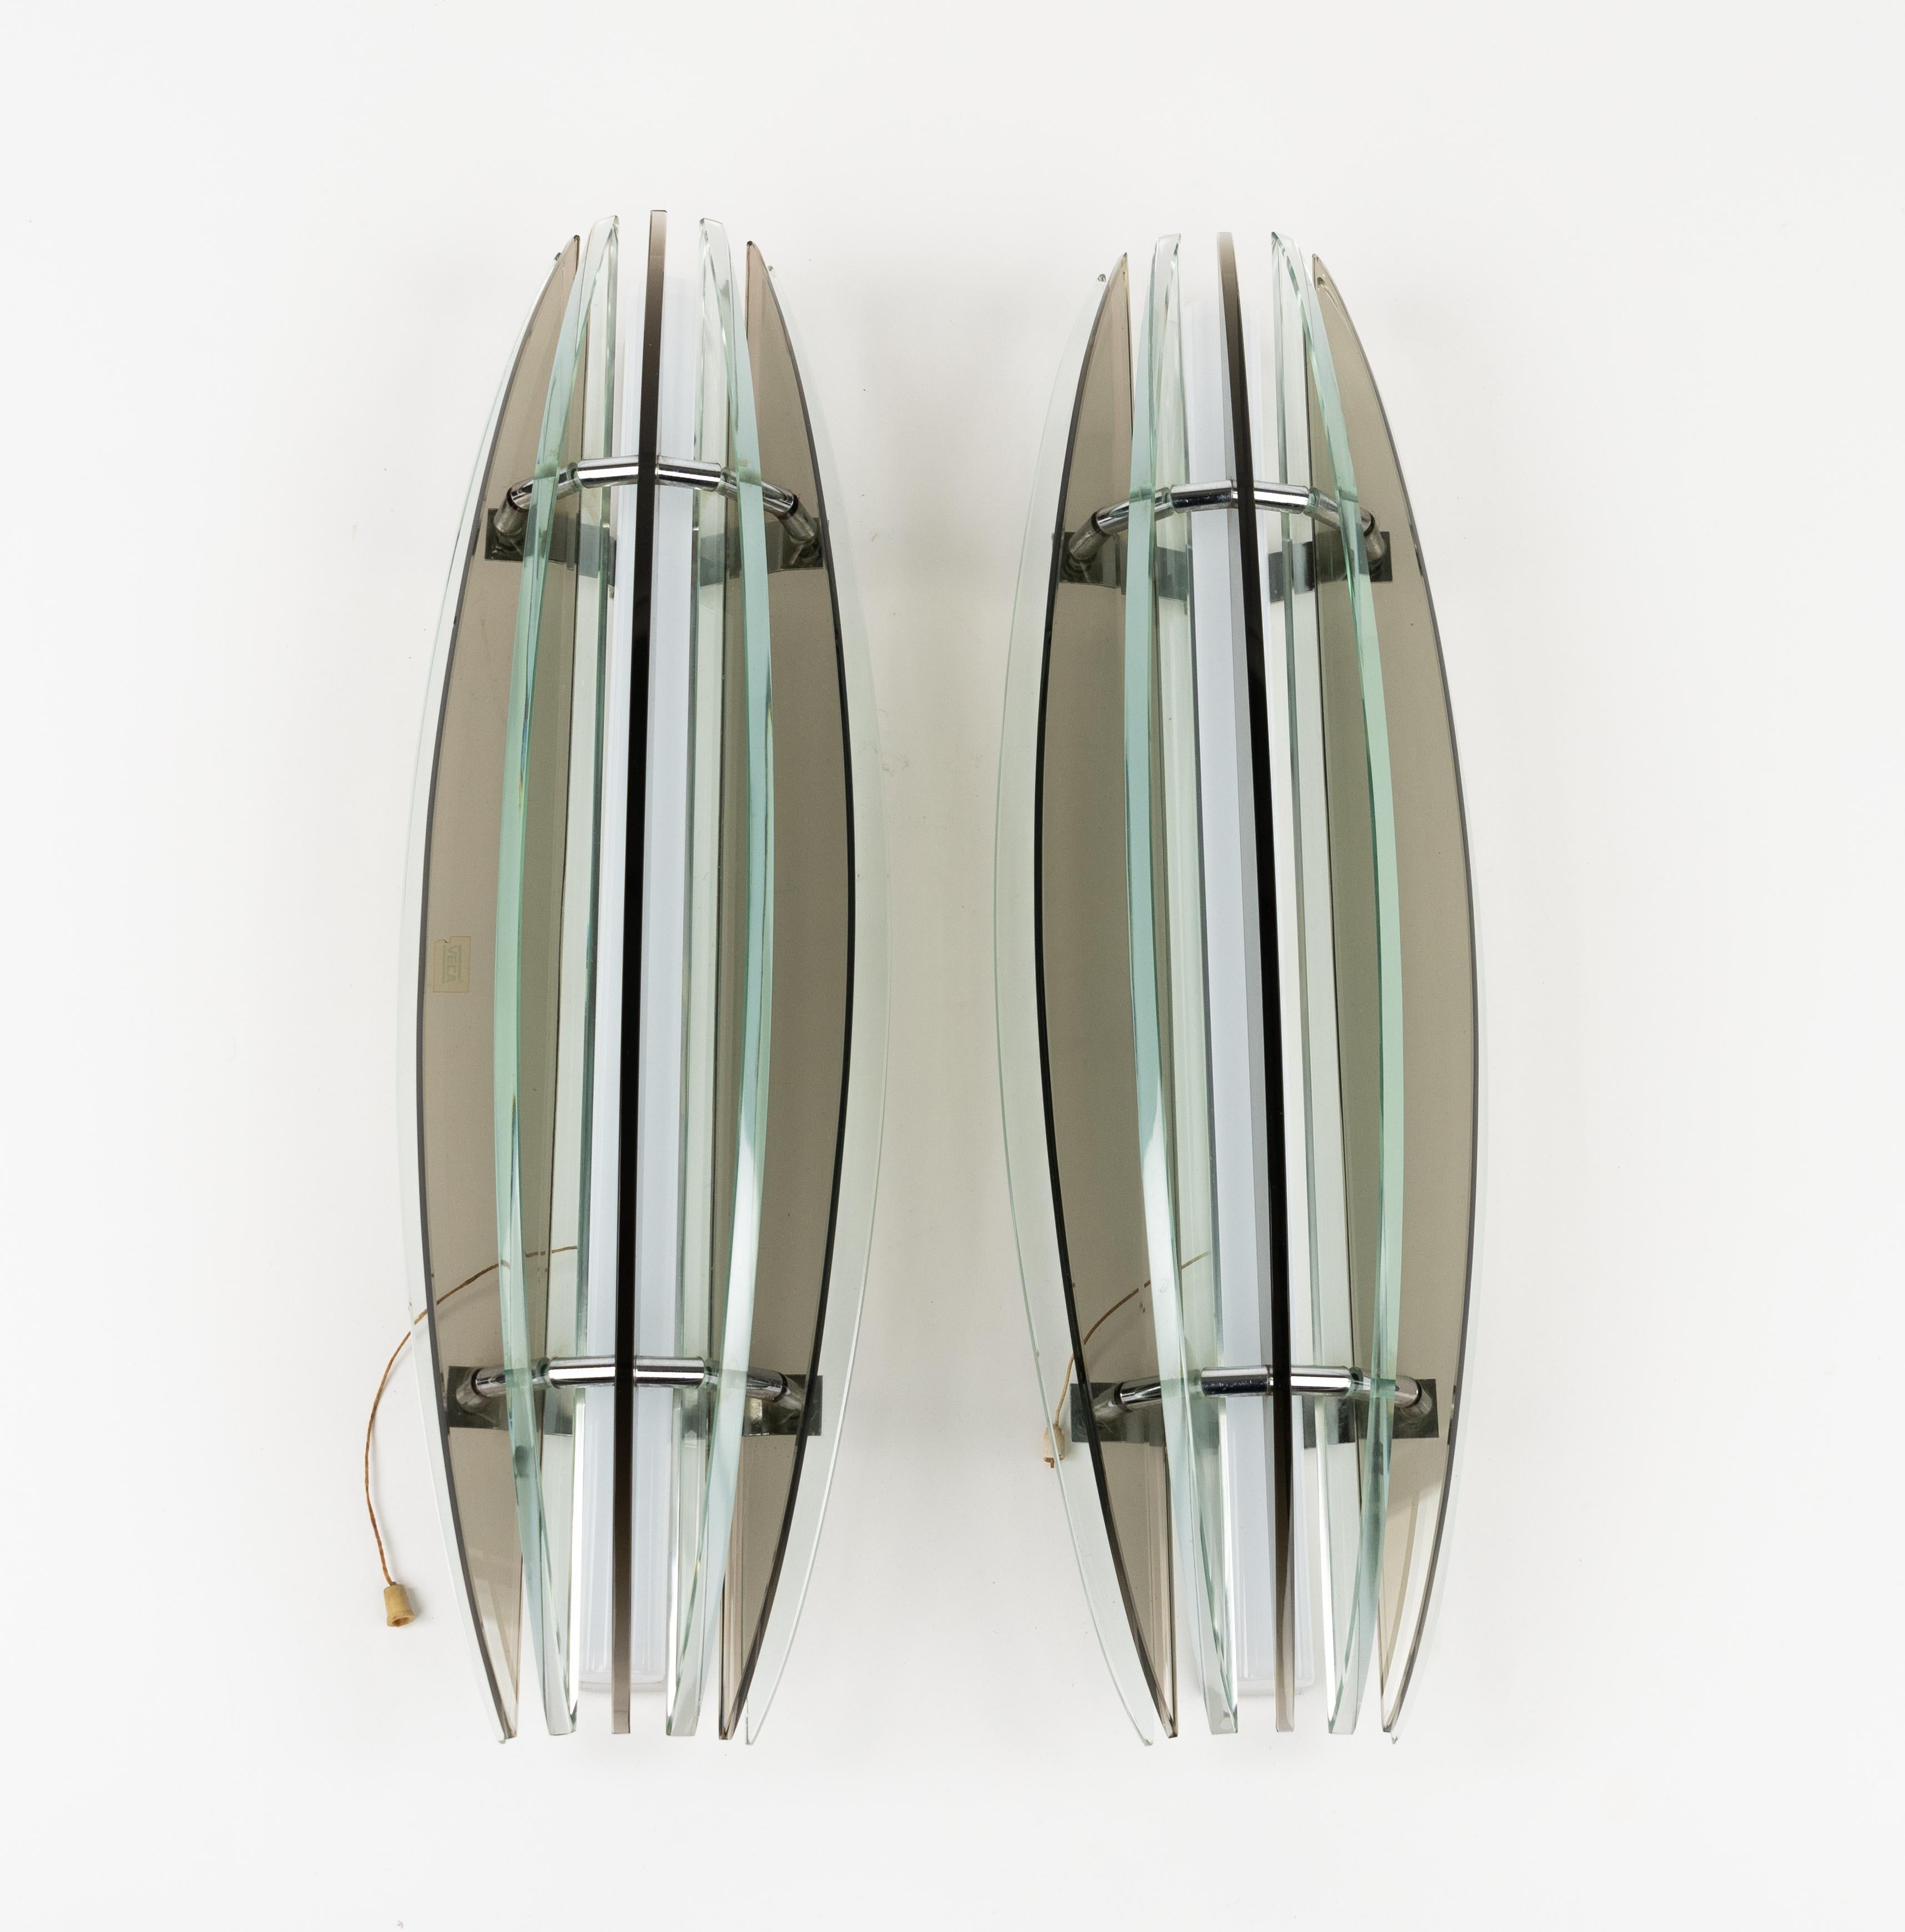 Midcentury Large Pair of Sconces in Colored Glass & Chrome by Veca, Italy, 1970s For Sale 7